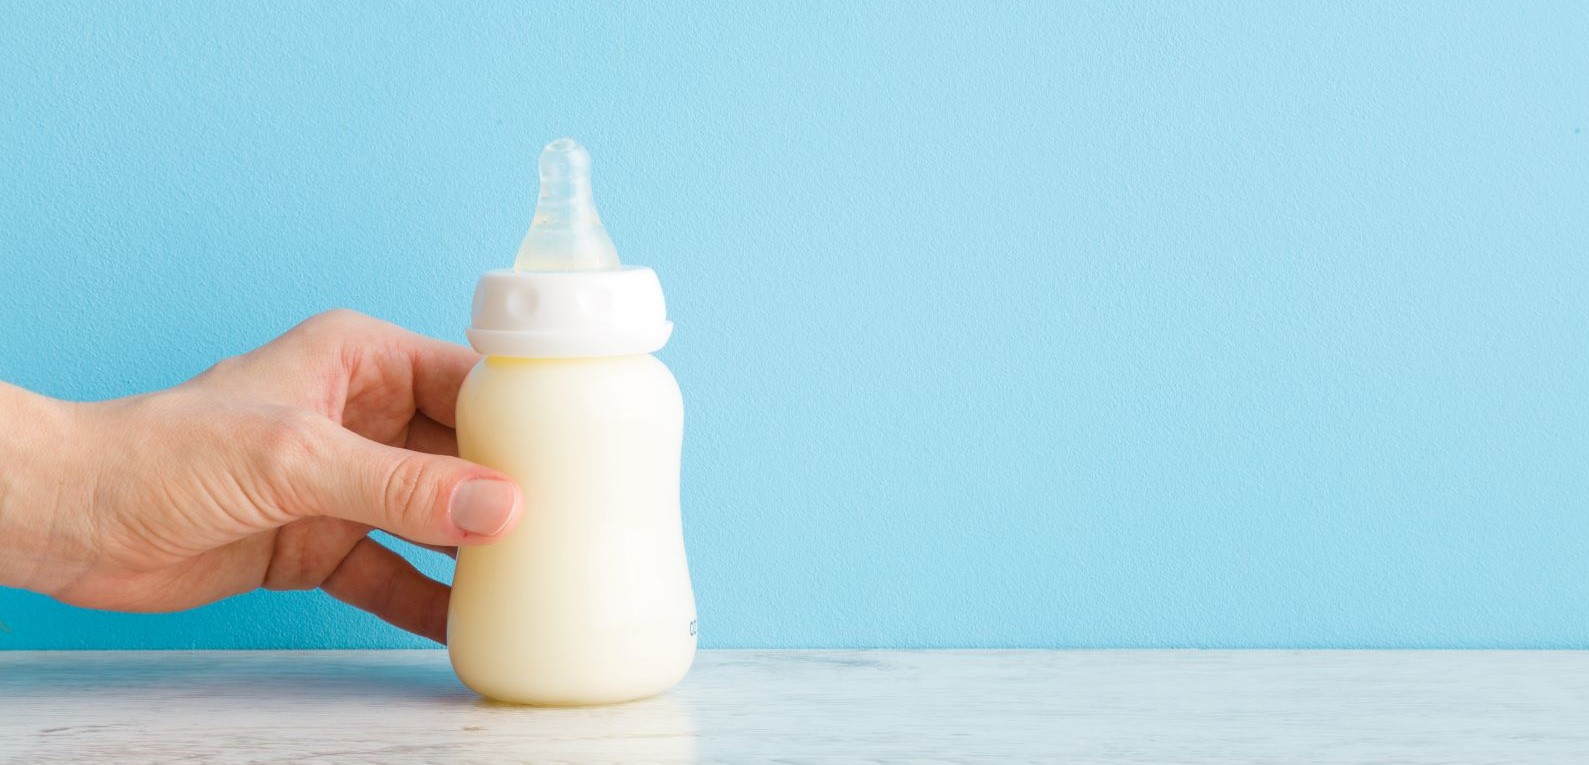 Baby Formula Shortages Causes High Anxiety: How Parents Can Cope